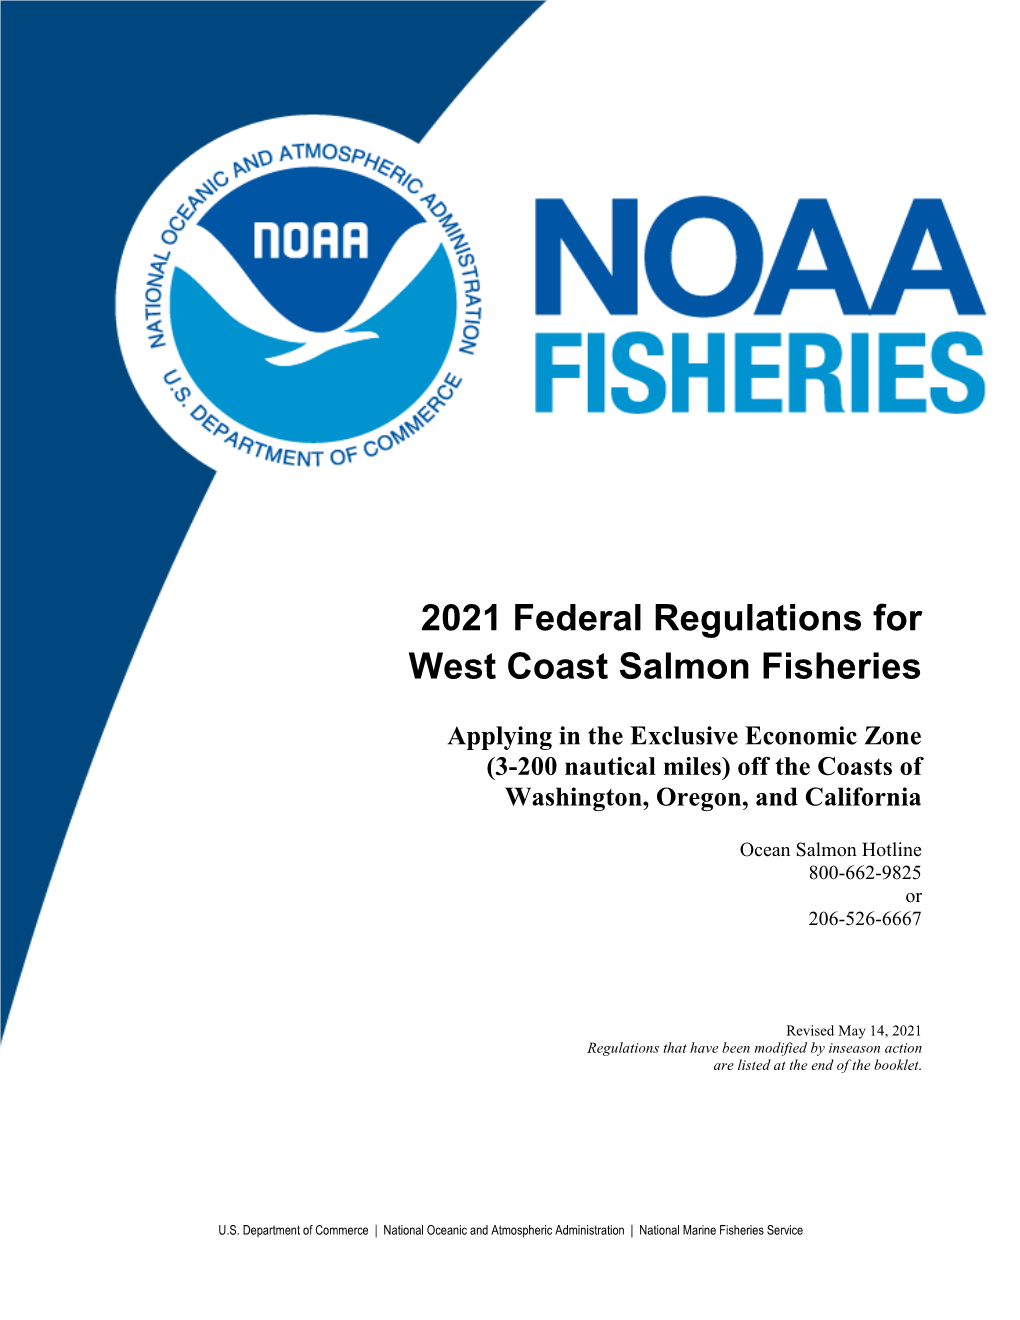 2021 Federal Regulations for West Coast Salmon Fisheries